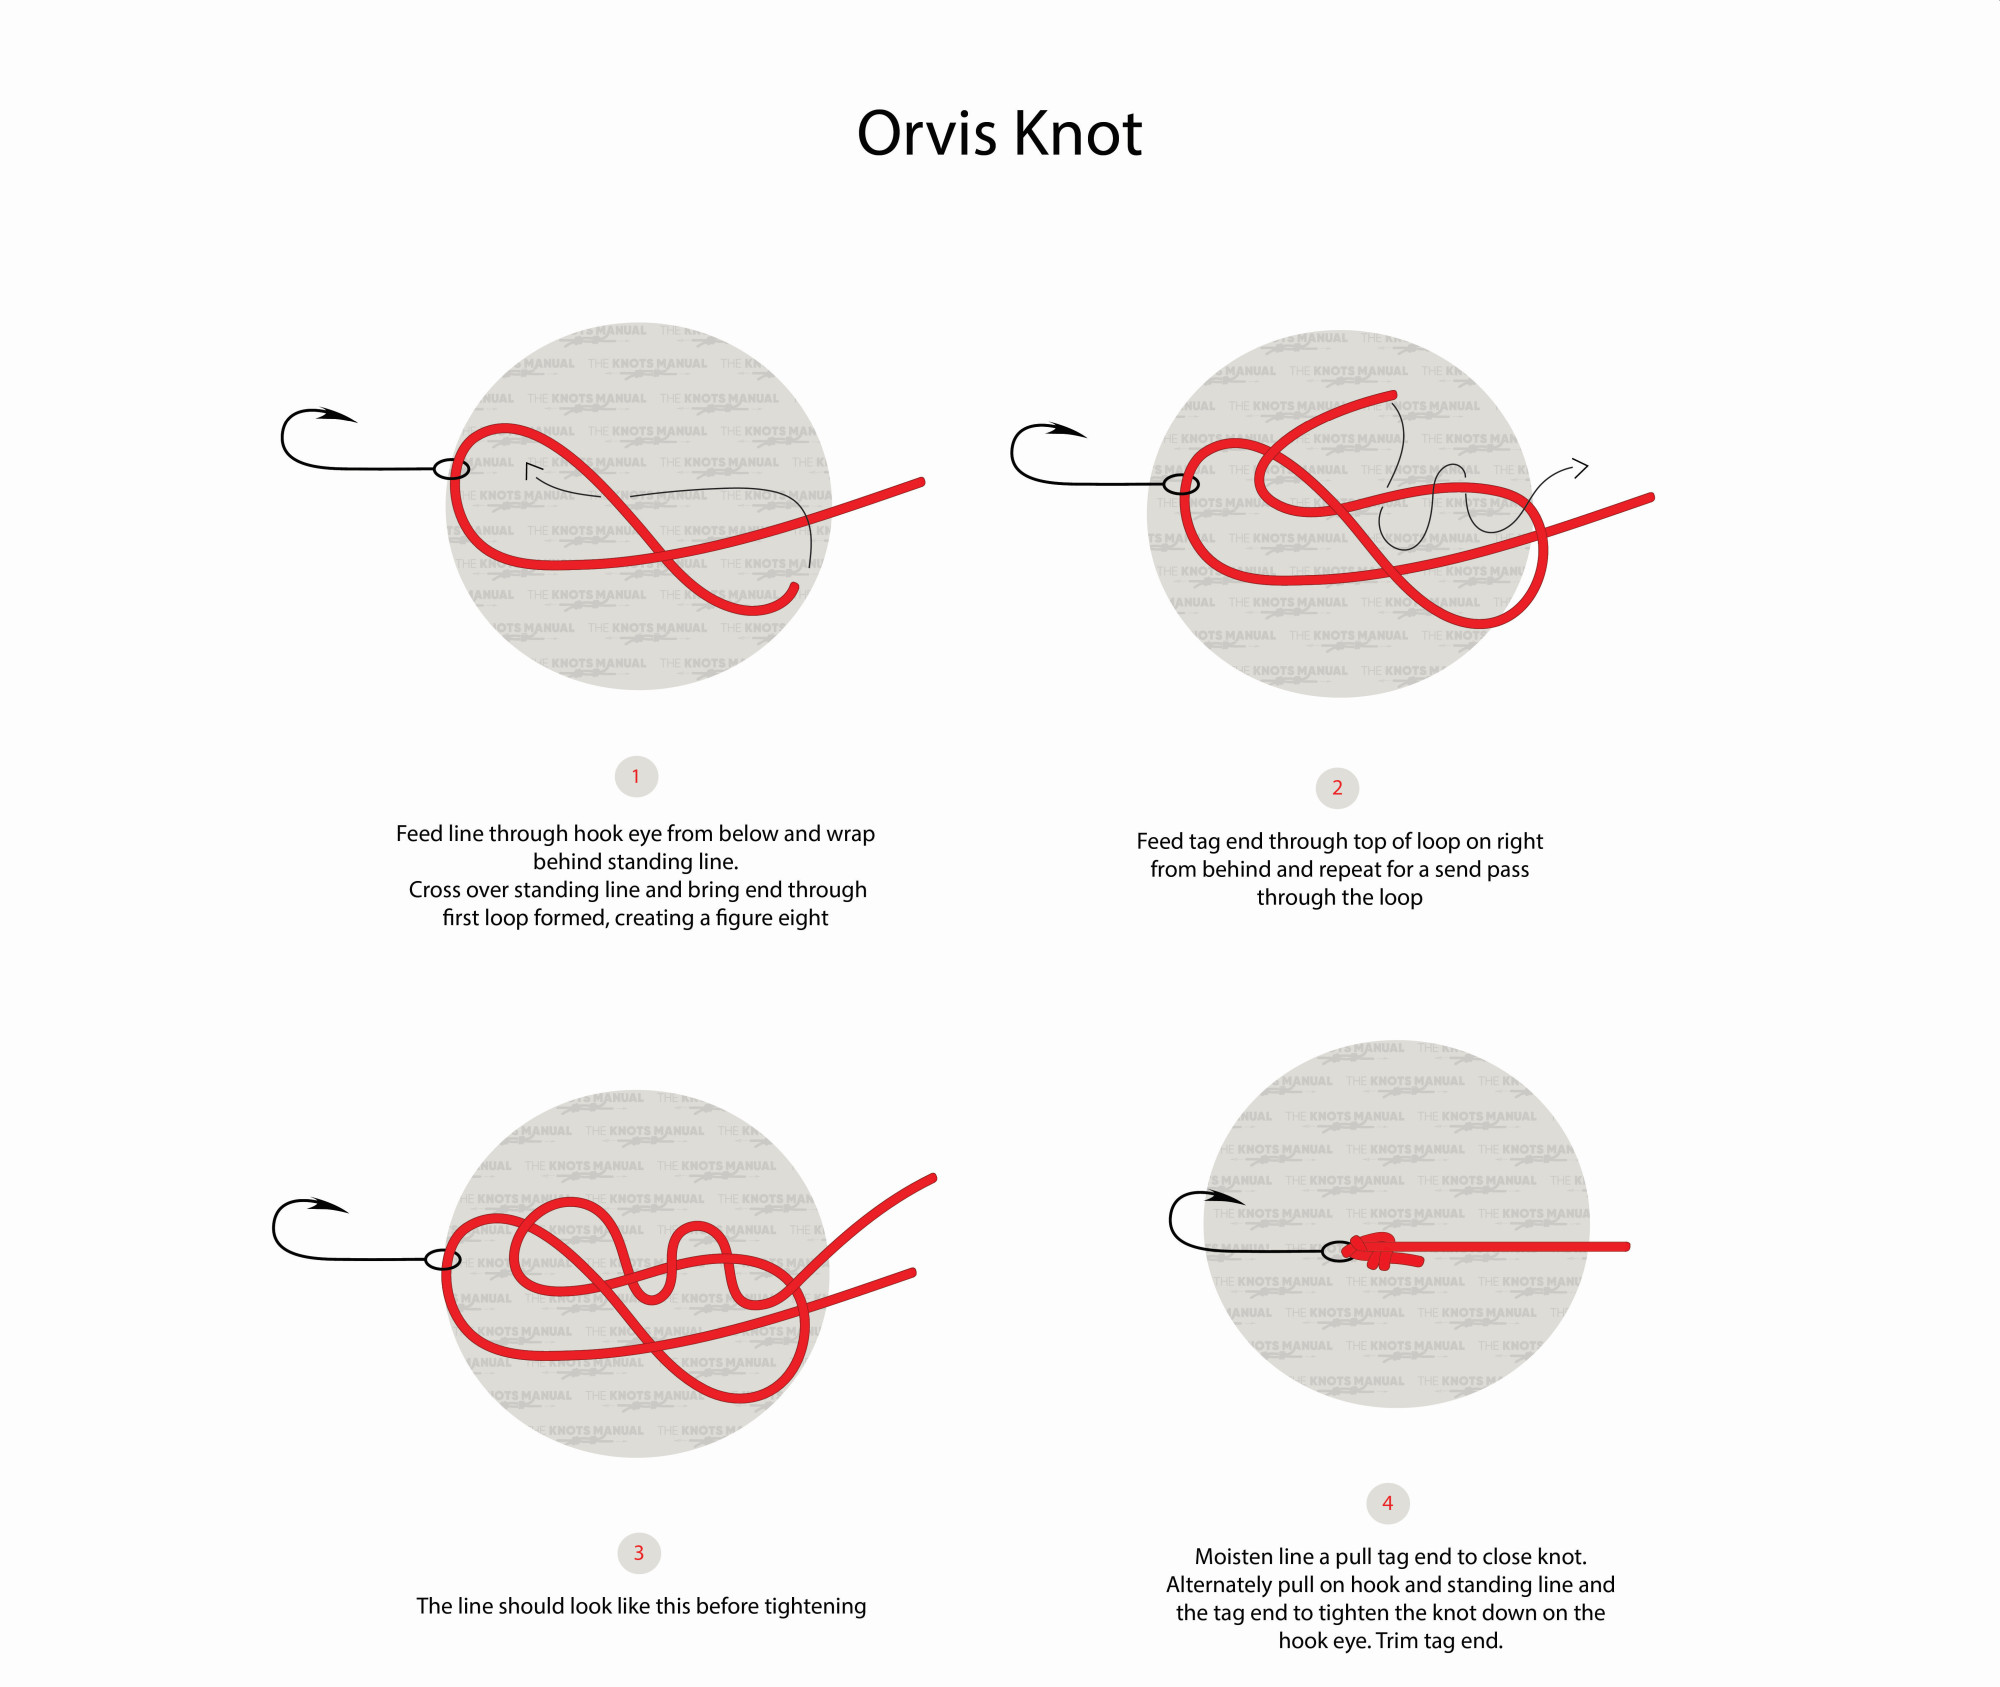 How to tie an Orvis Knot step by step